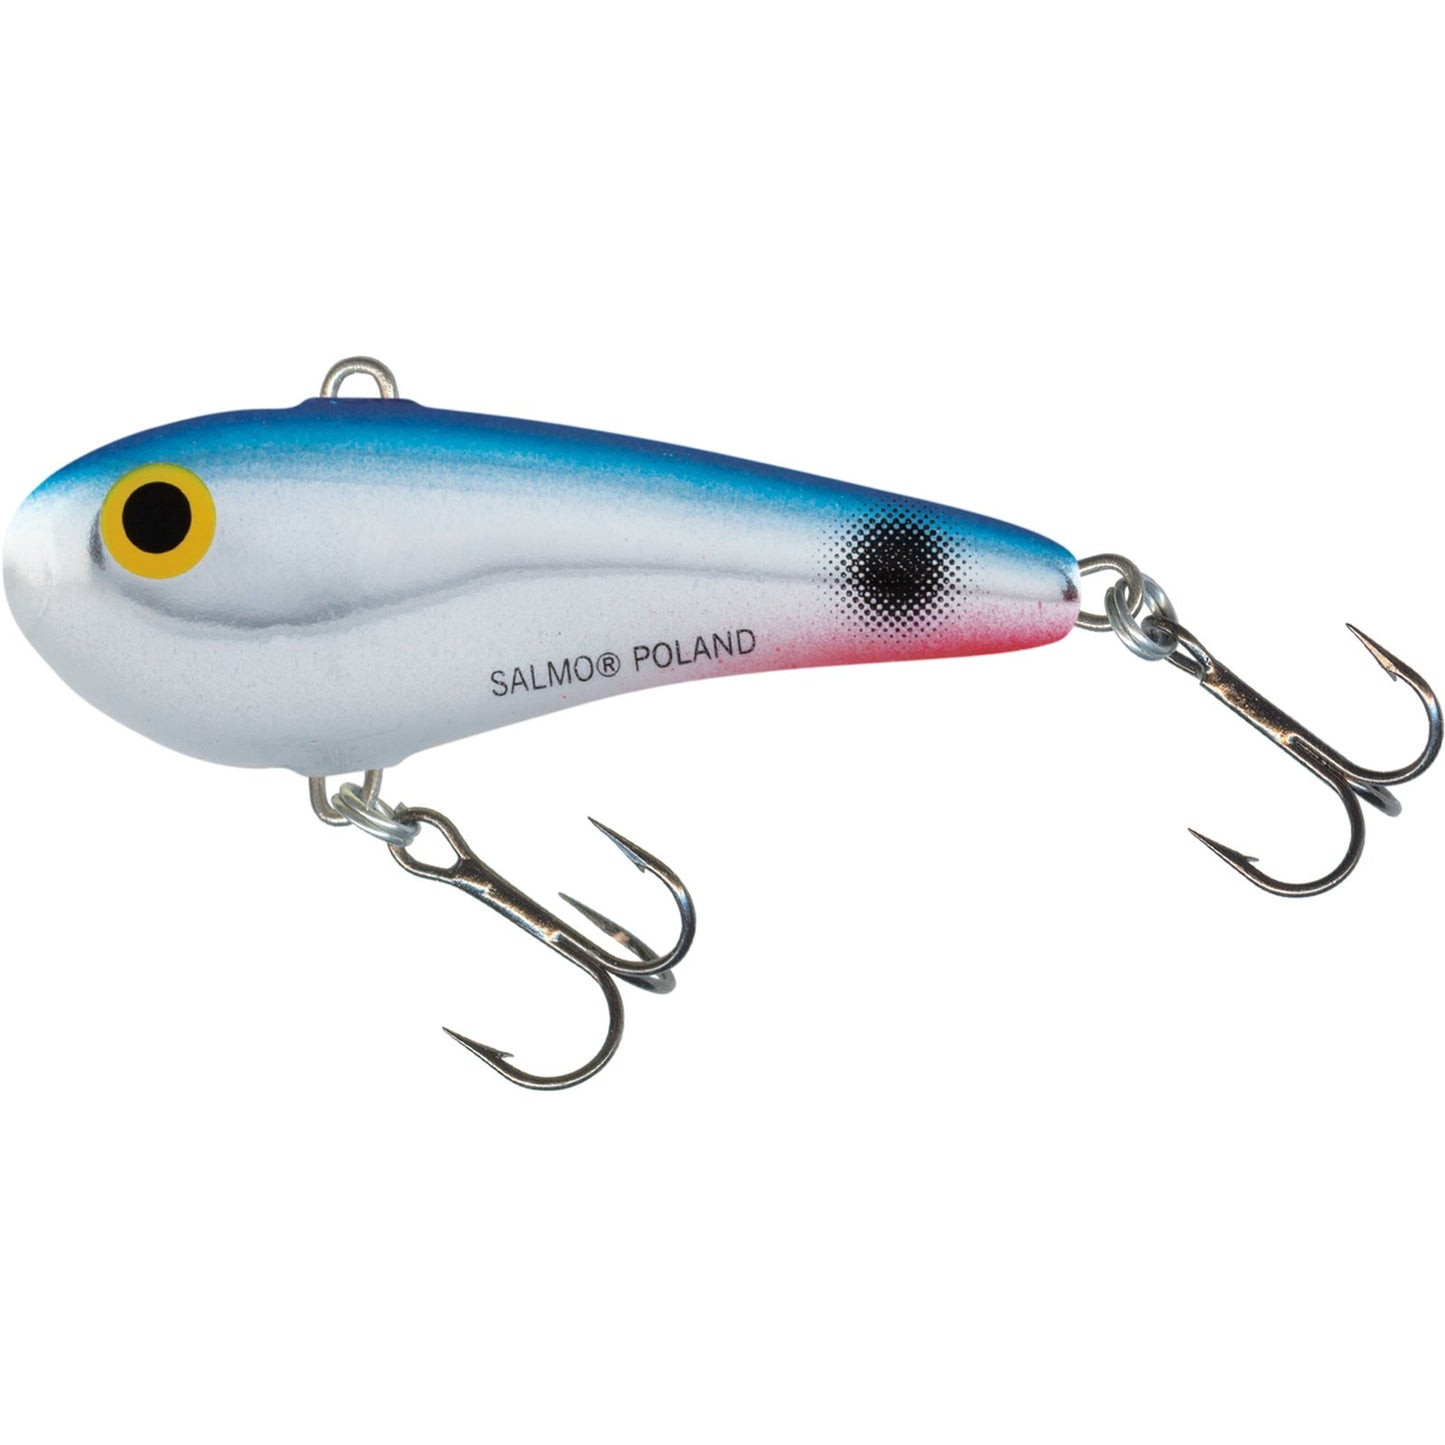 Salmo CHUBBY DARTER SINKING 4 Red Tail Shiner